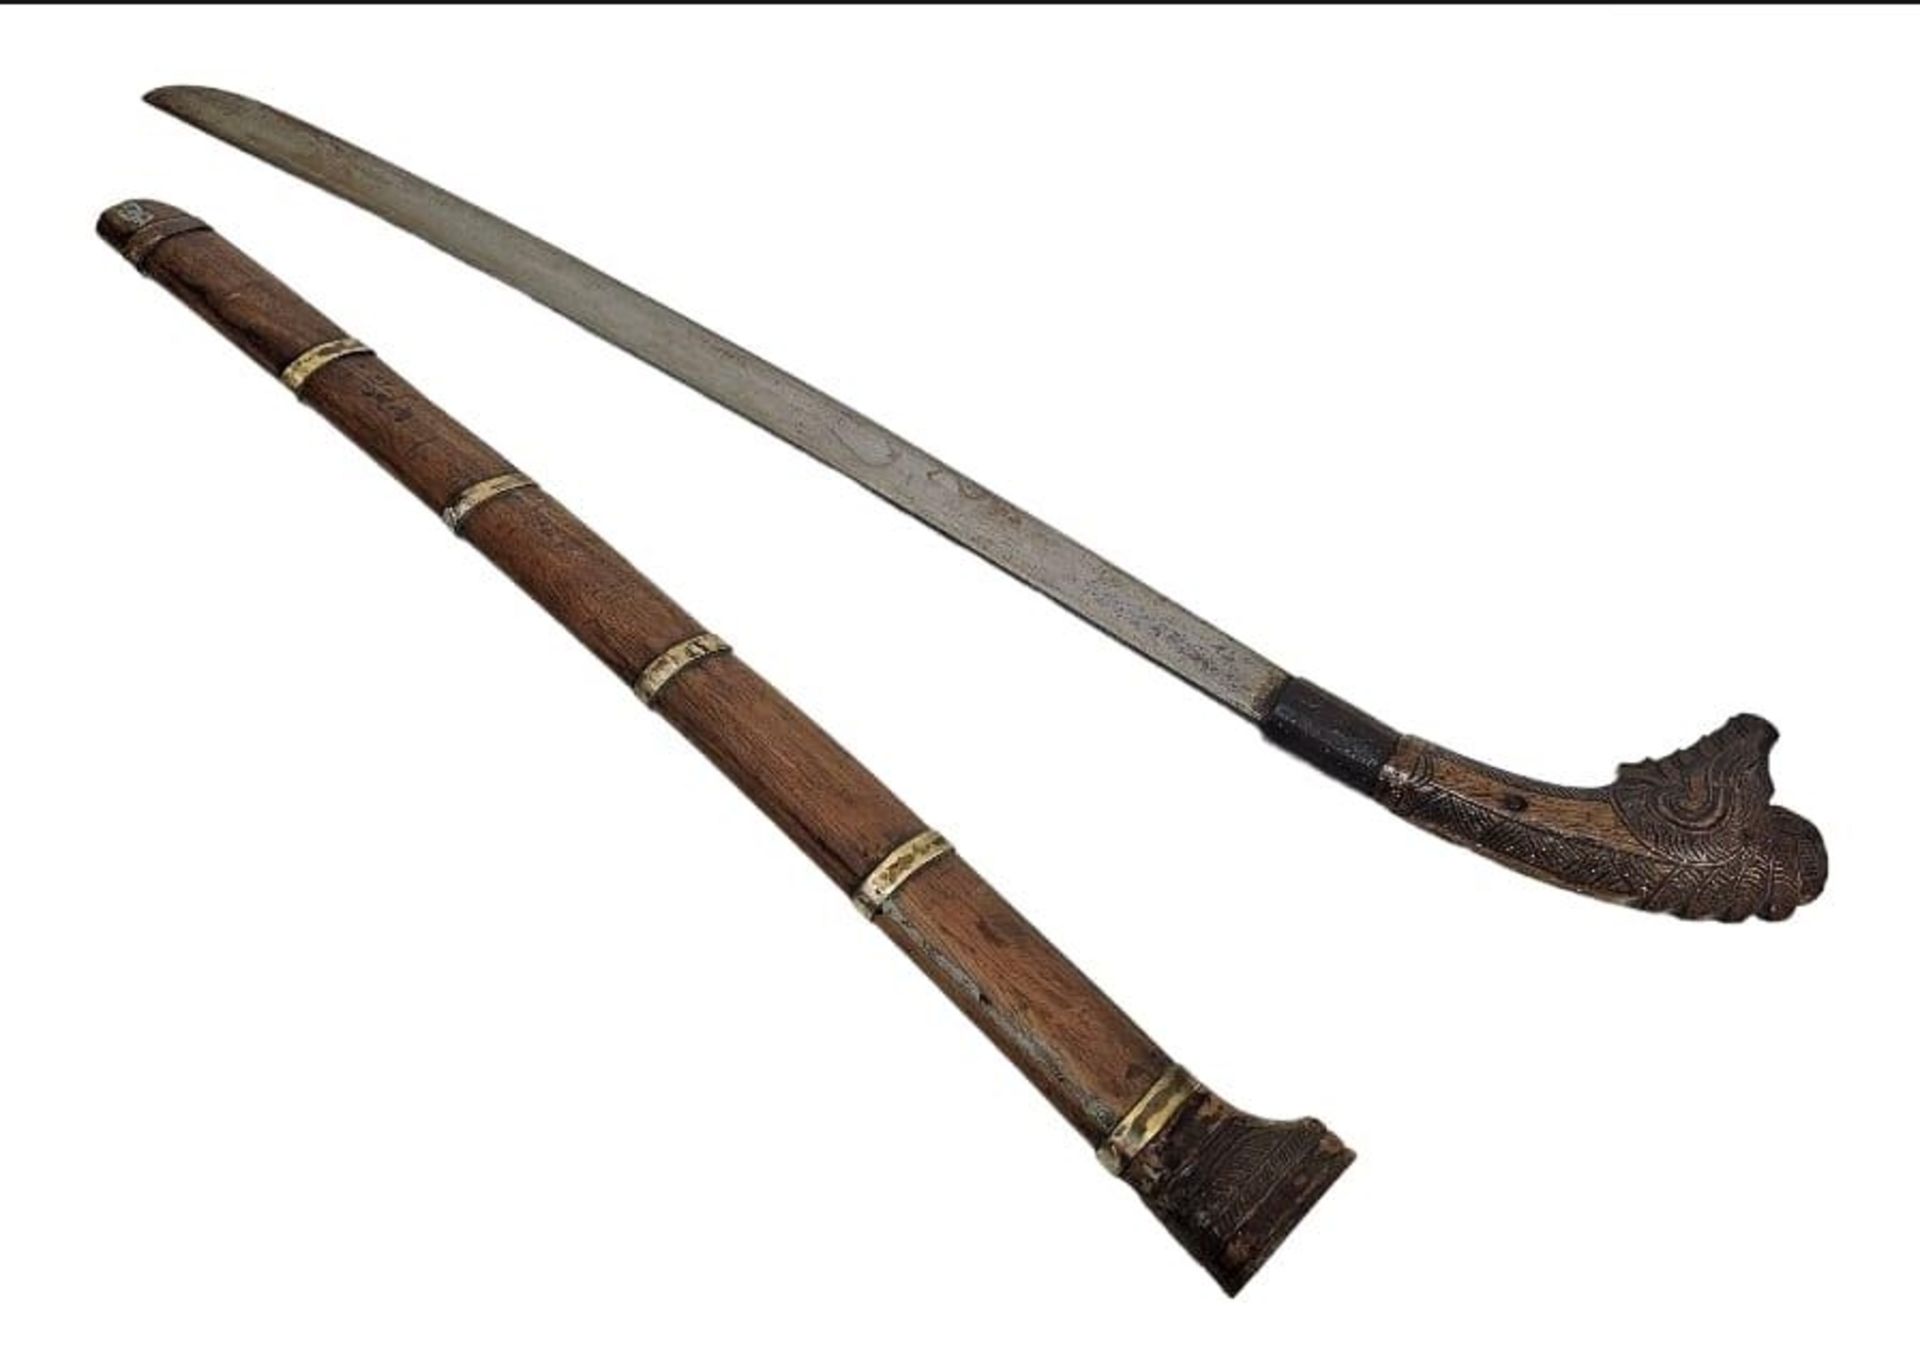 A Very Rare 19 th Century Oriental Short Sword with Wooden Hilt Carved as a Mythical Creature.